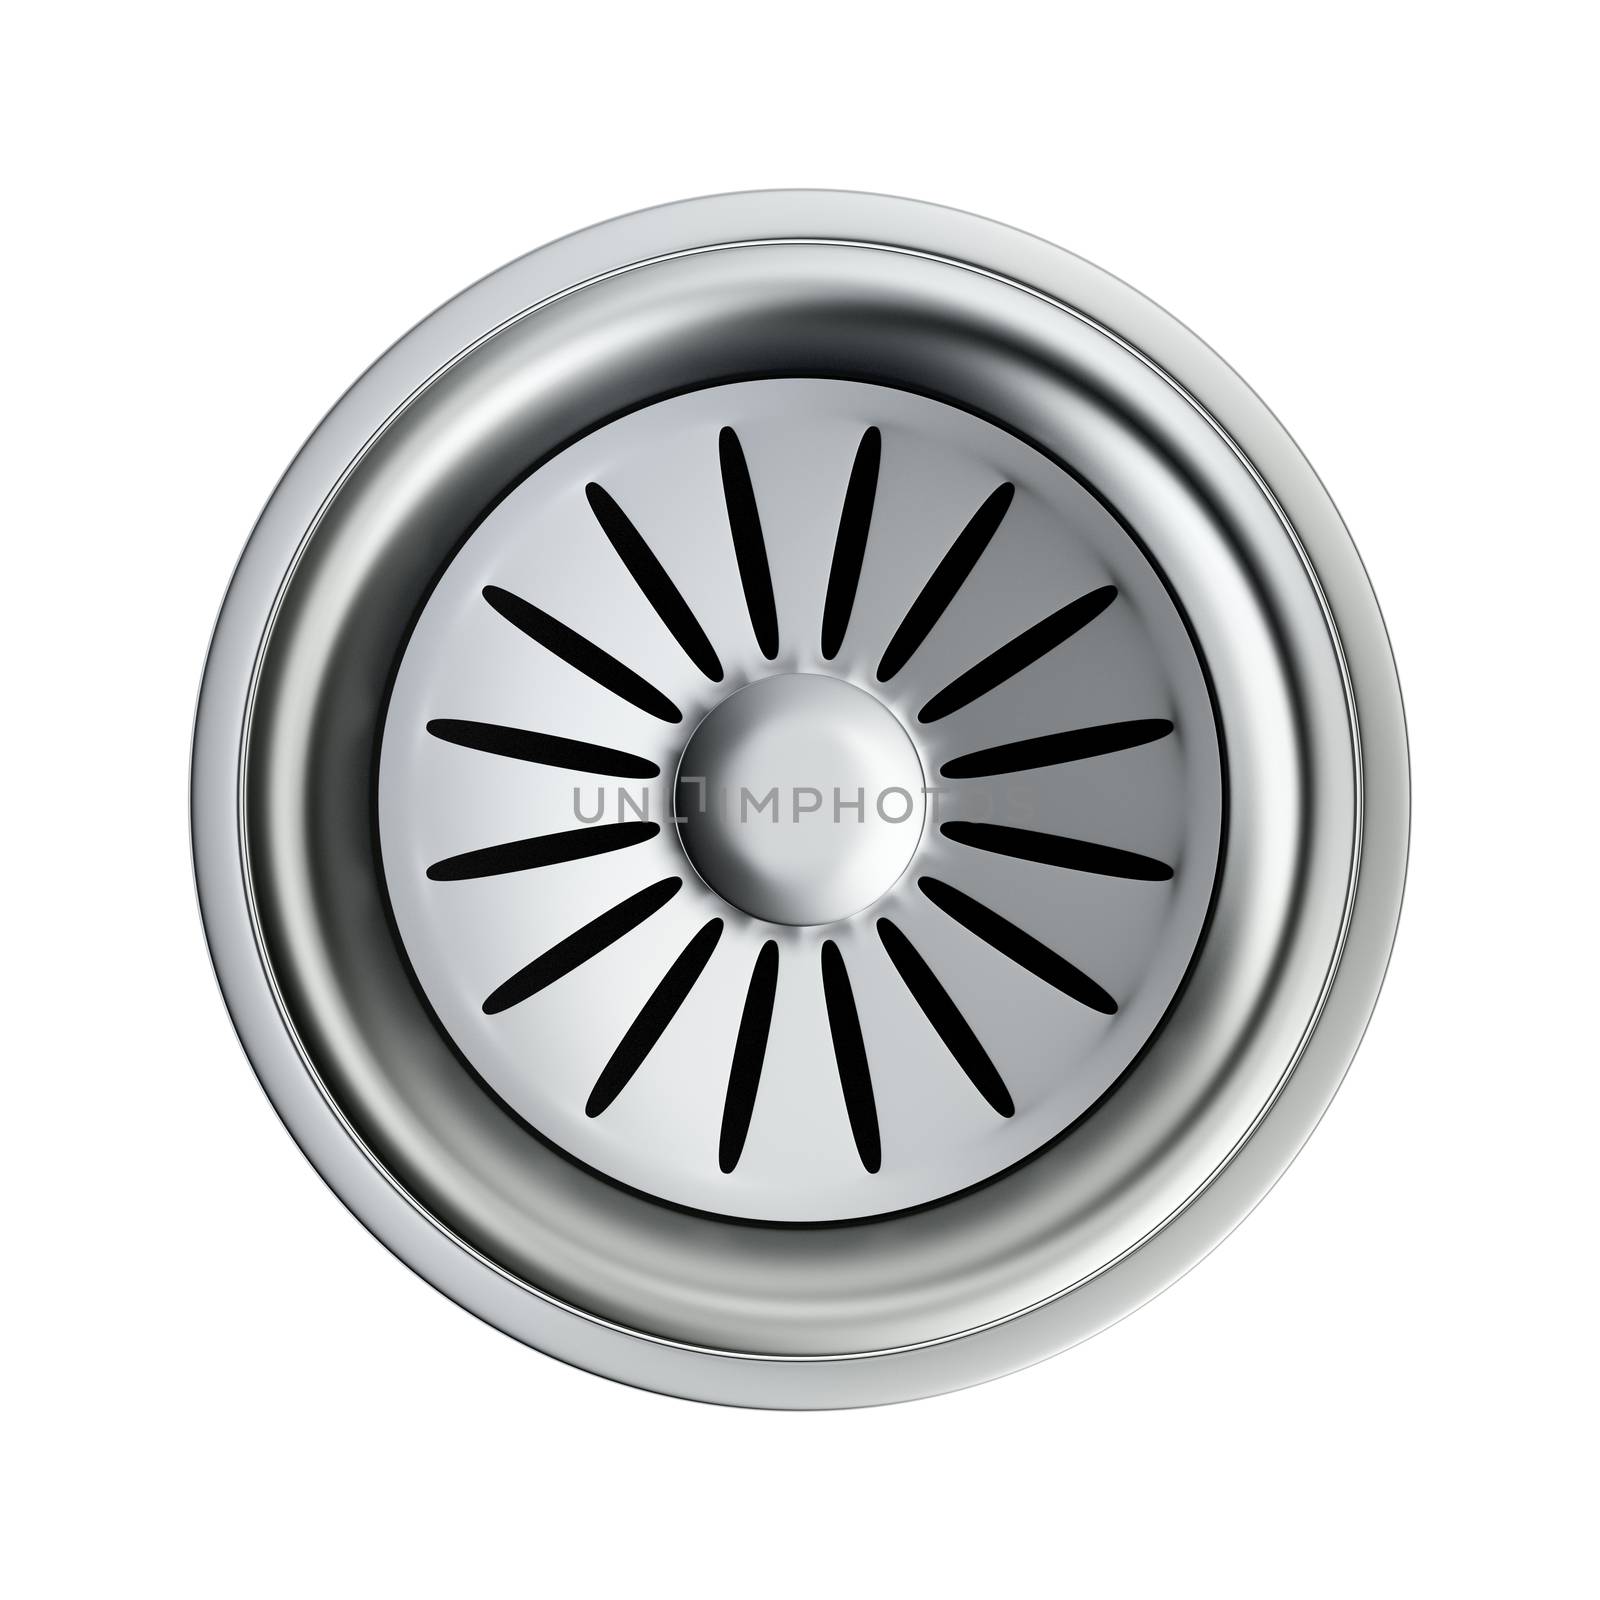 Silver sink strainer with stopper, top view by magraphics